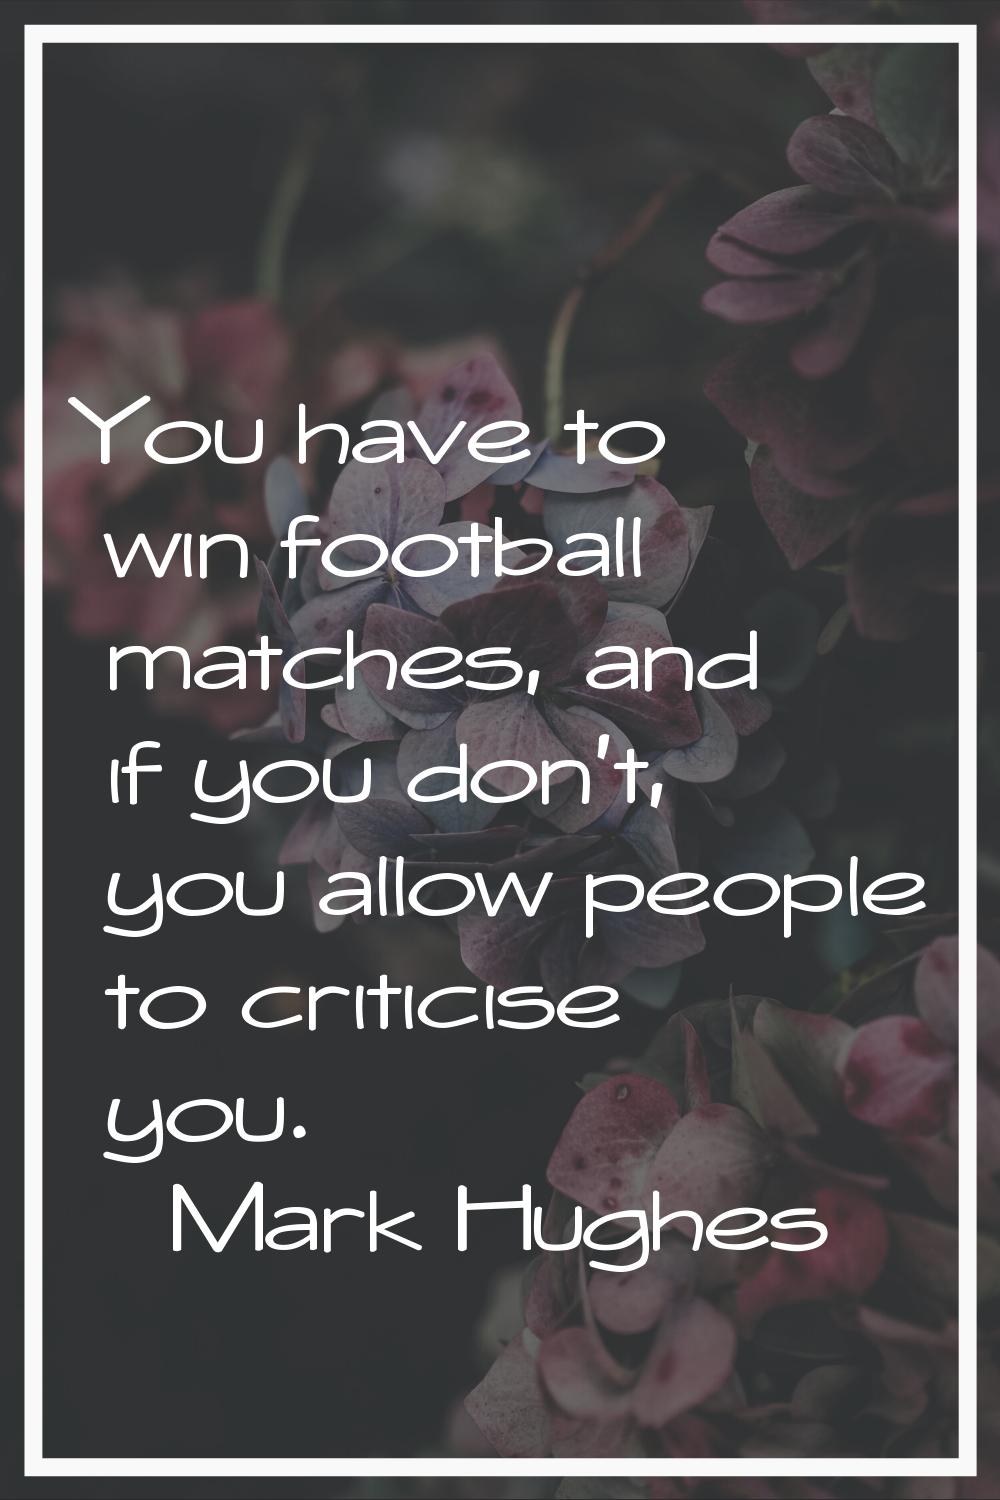 You have to win football matches, and if you don't, you allow people to criticise you.